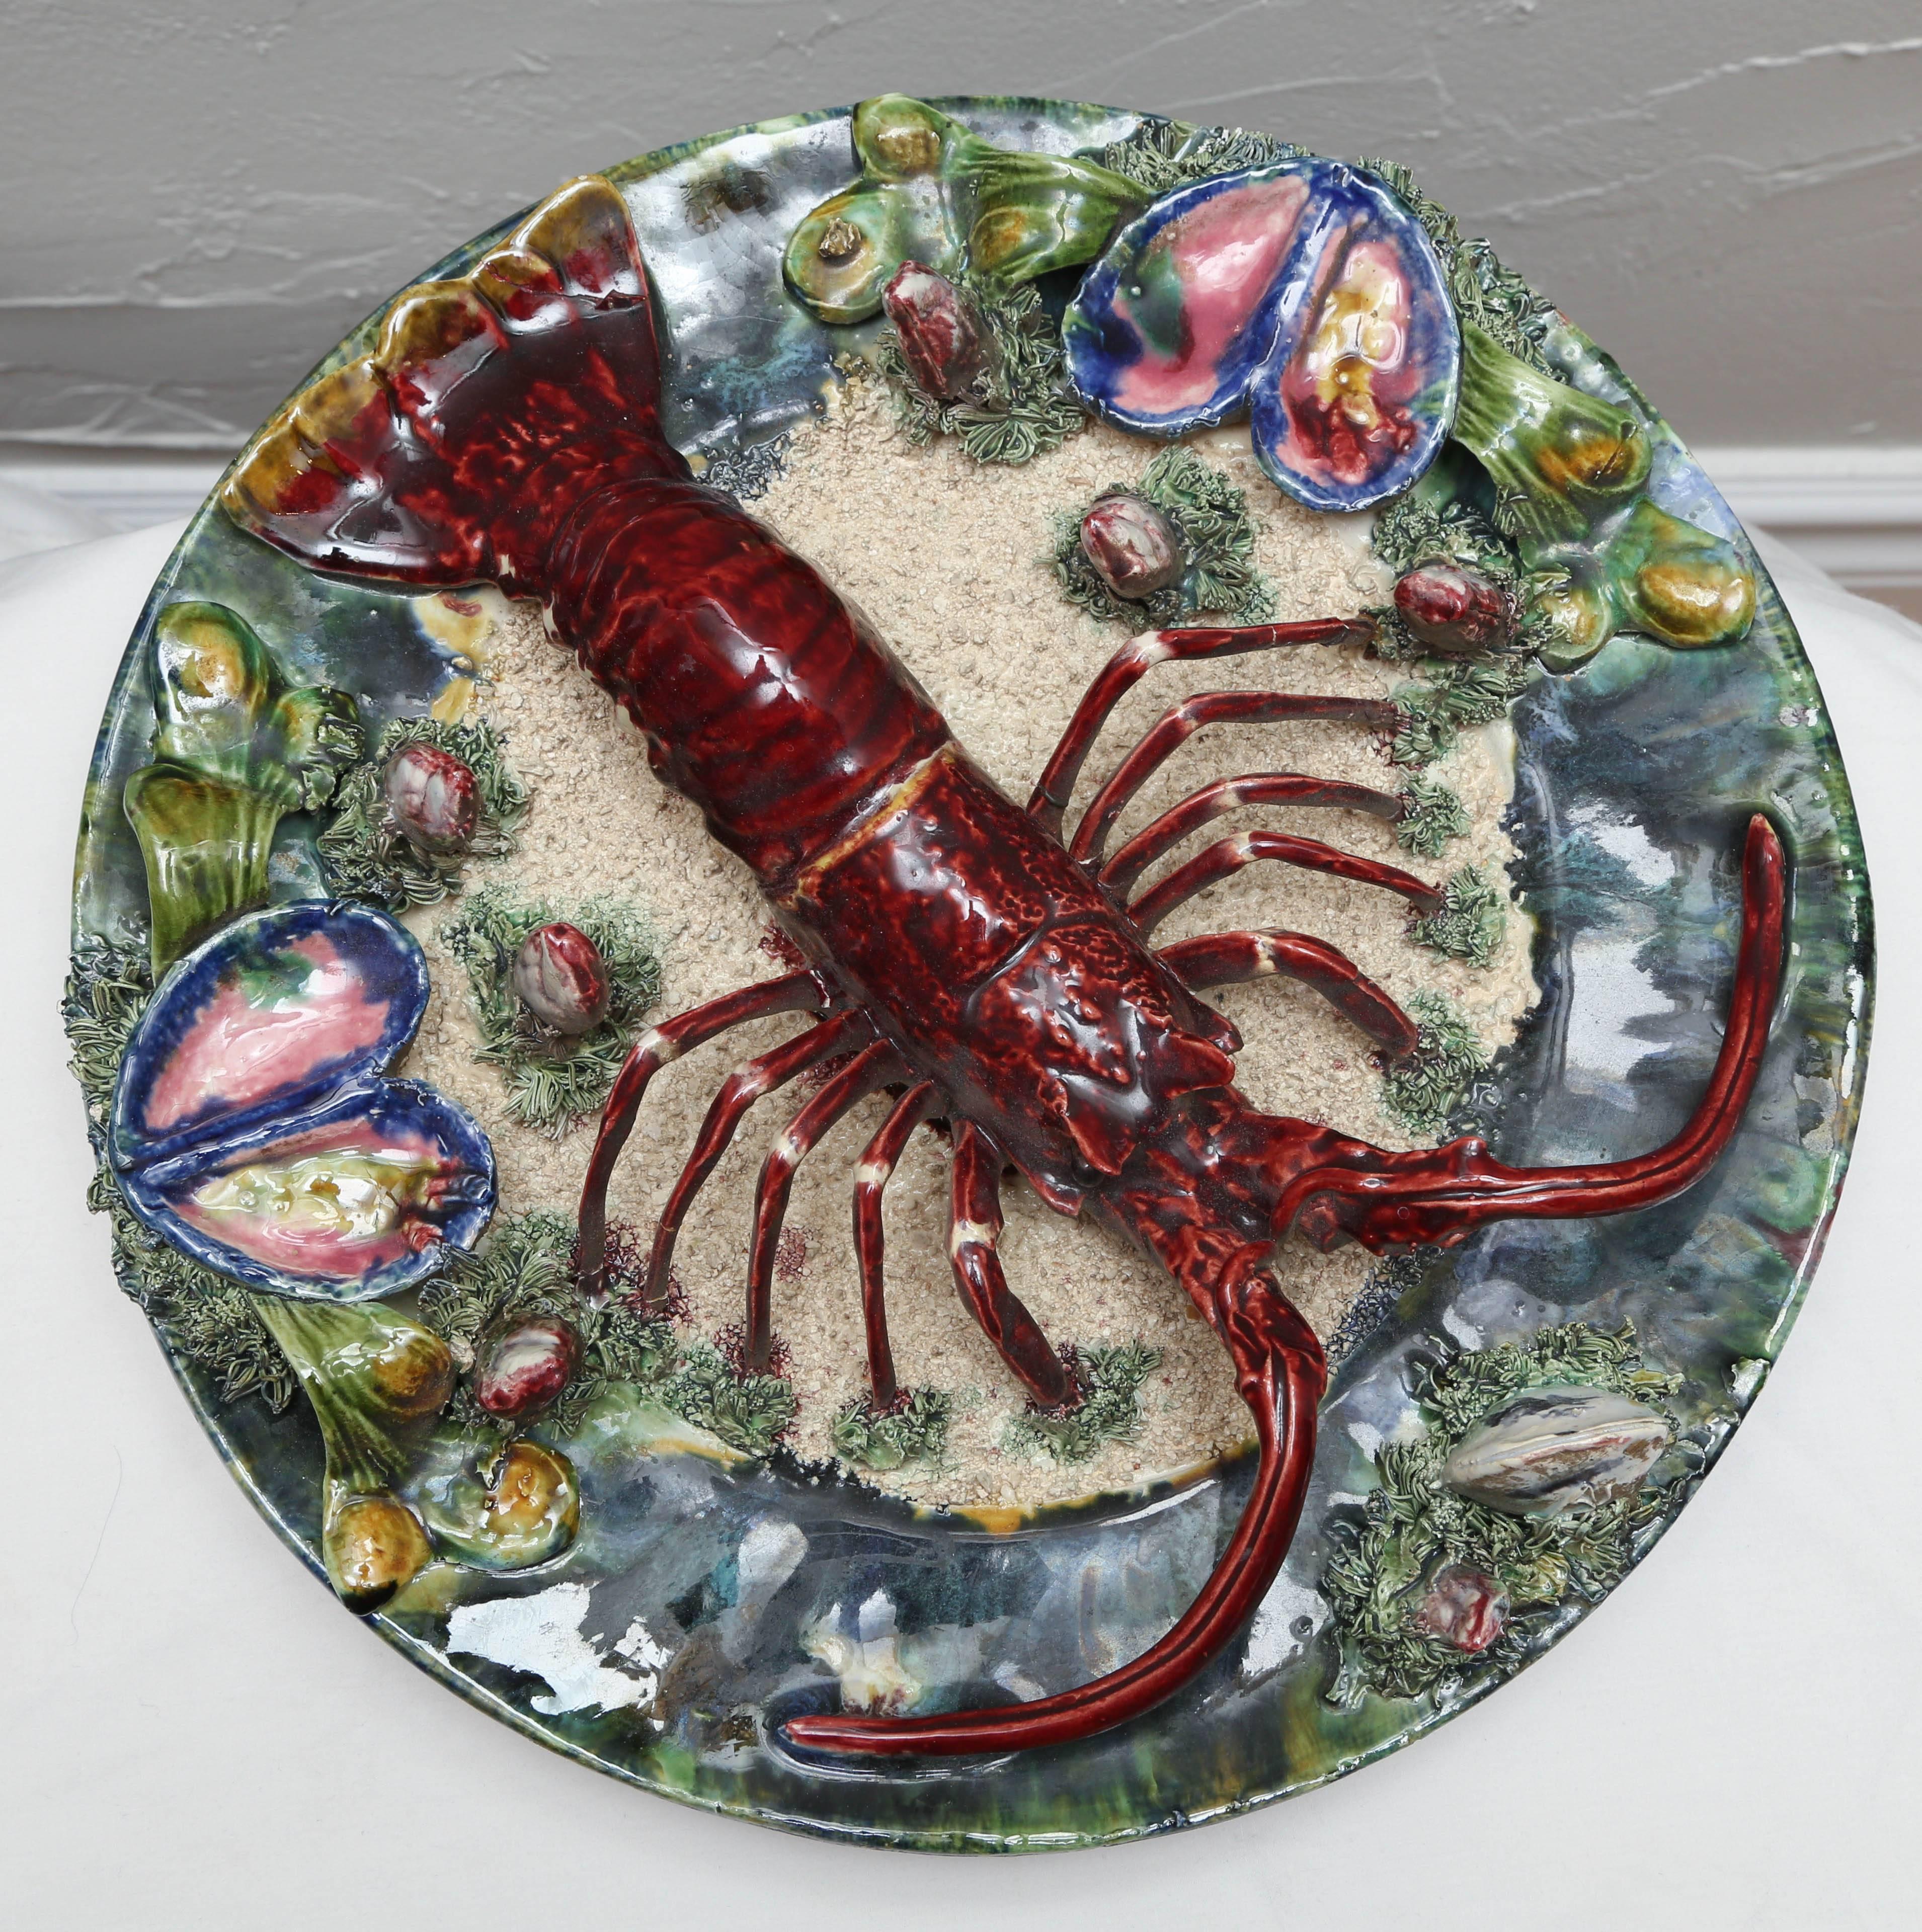 Three dimensional Majolica dish centered with a large lobster and surrounded by oysters. Signed Caldas, Portugal on reverse side.